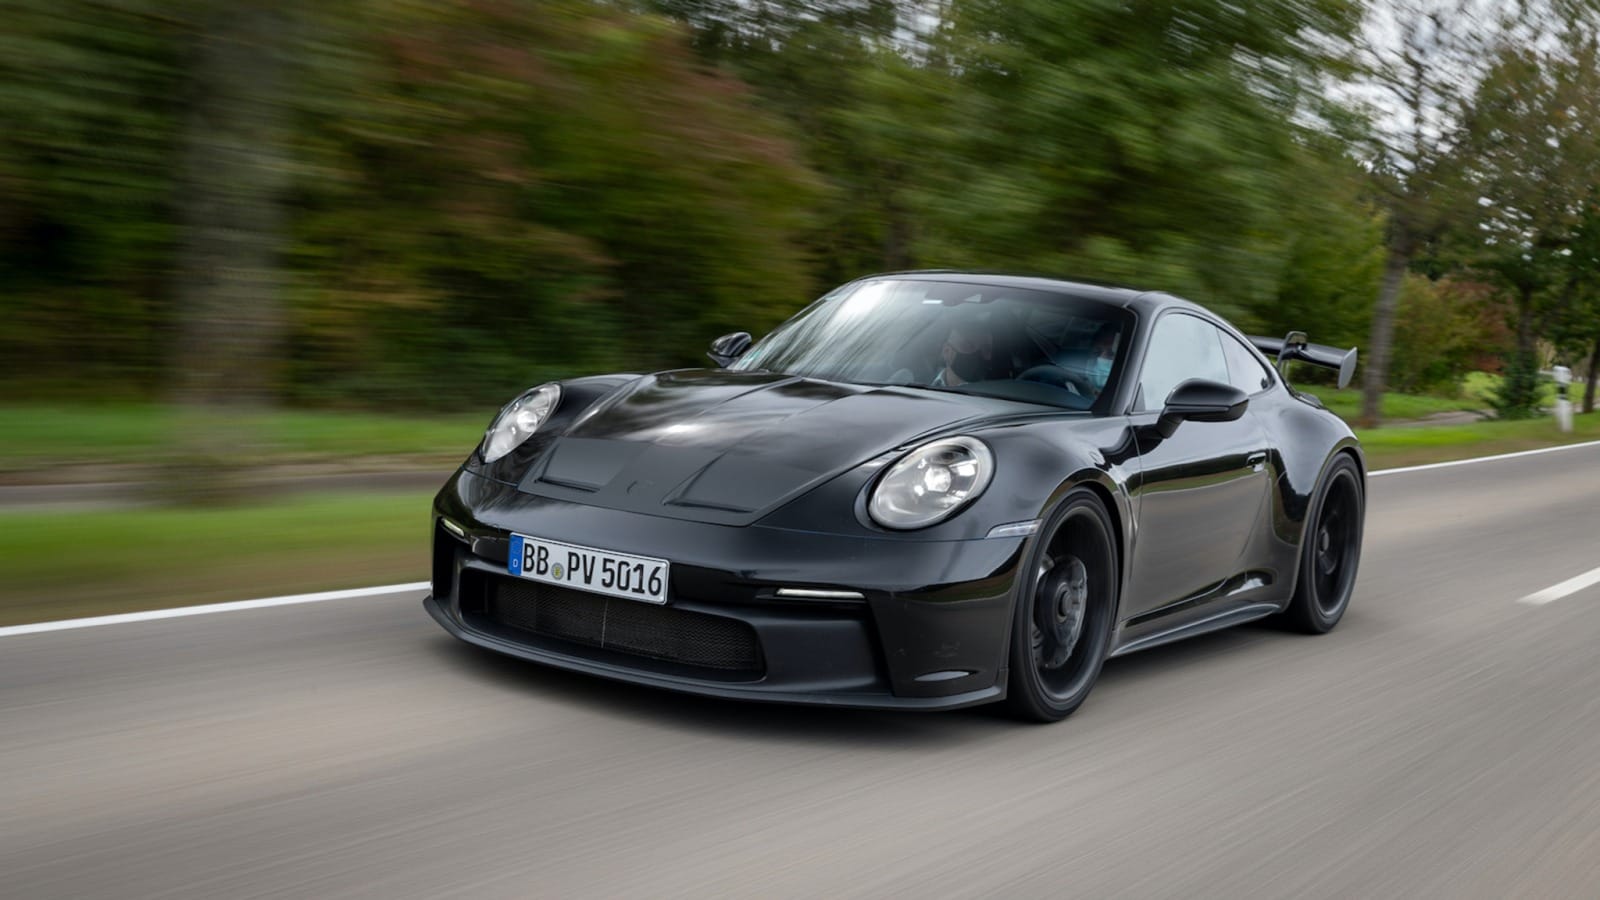 BREAKING: This Is Our Very Fast First Ride in the 2022 Porsche 911 GT3